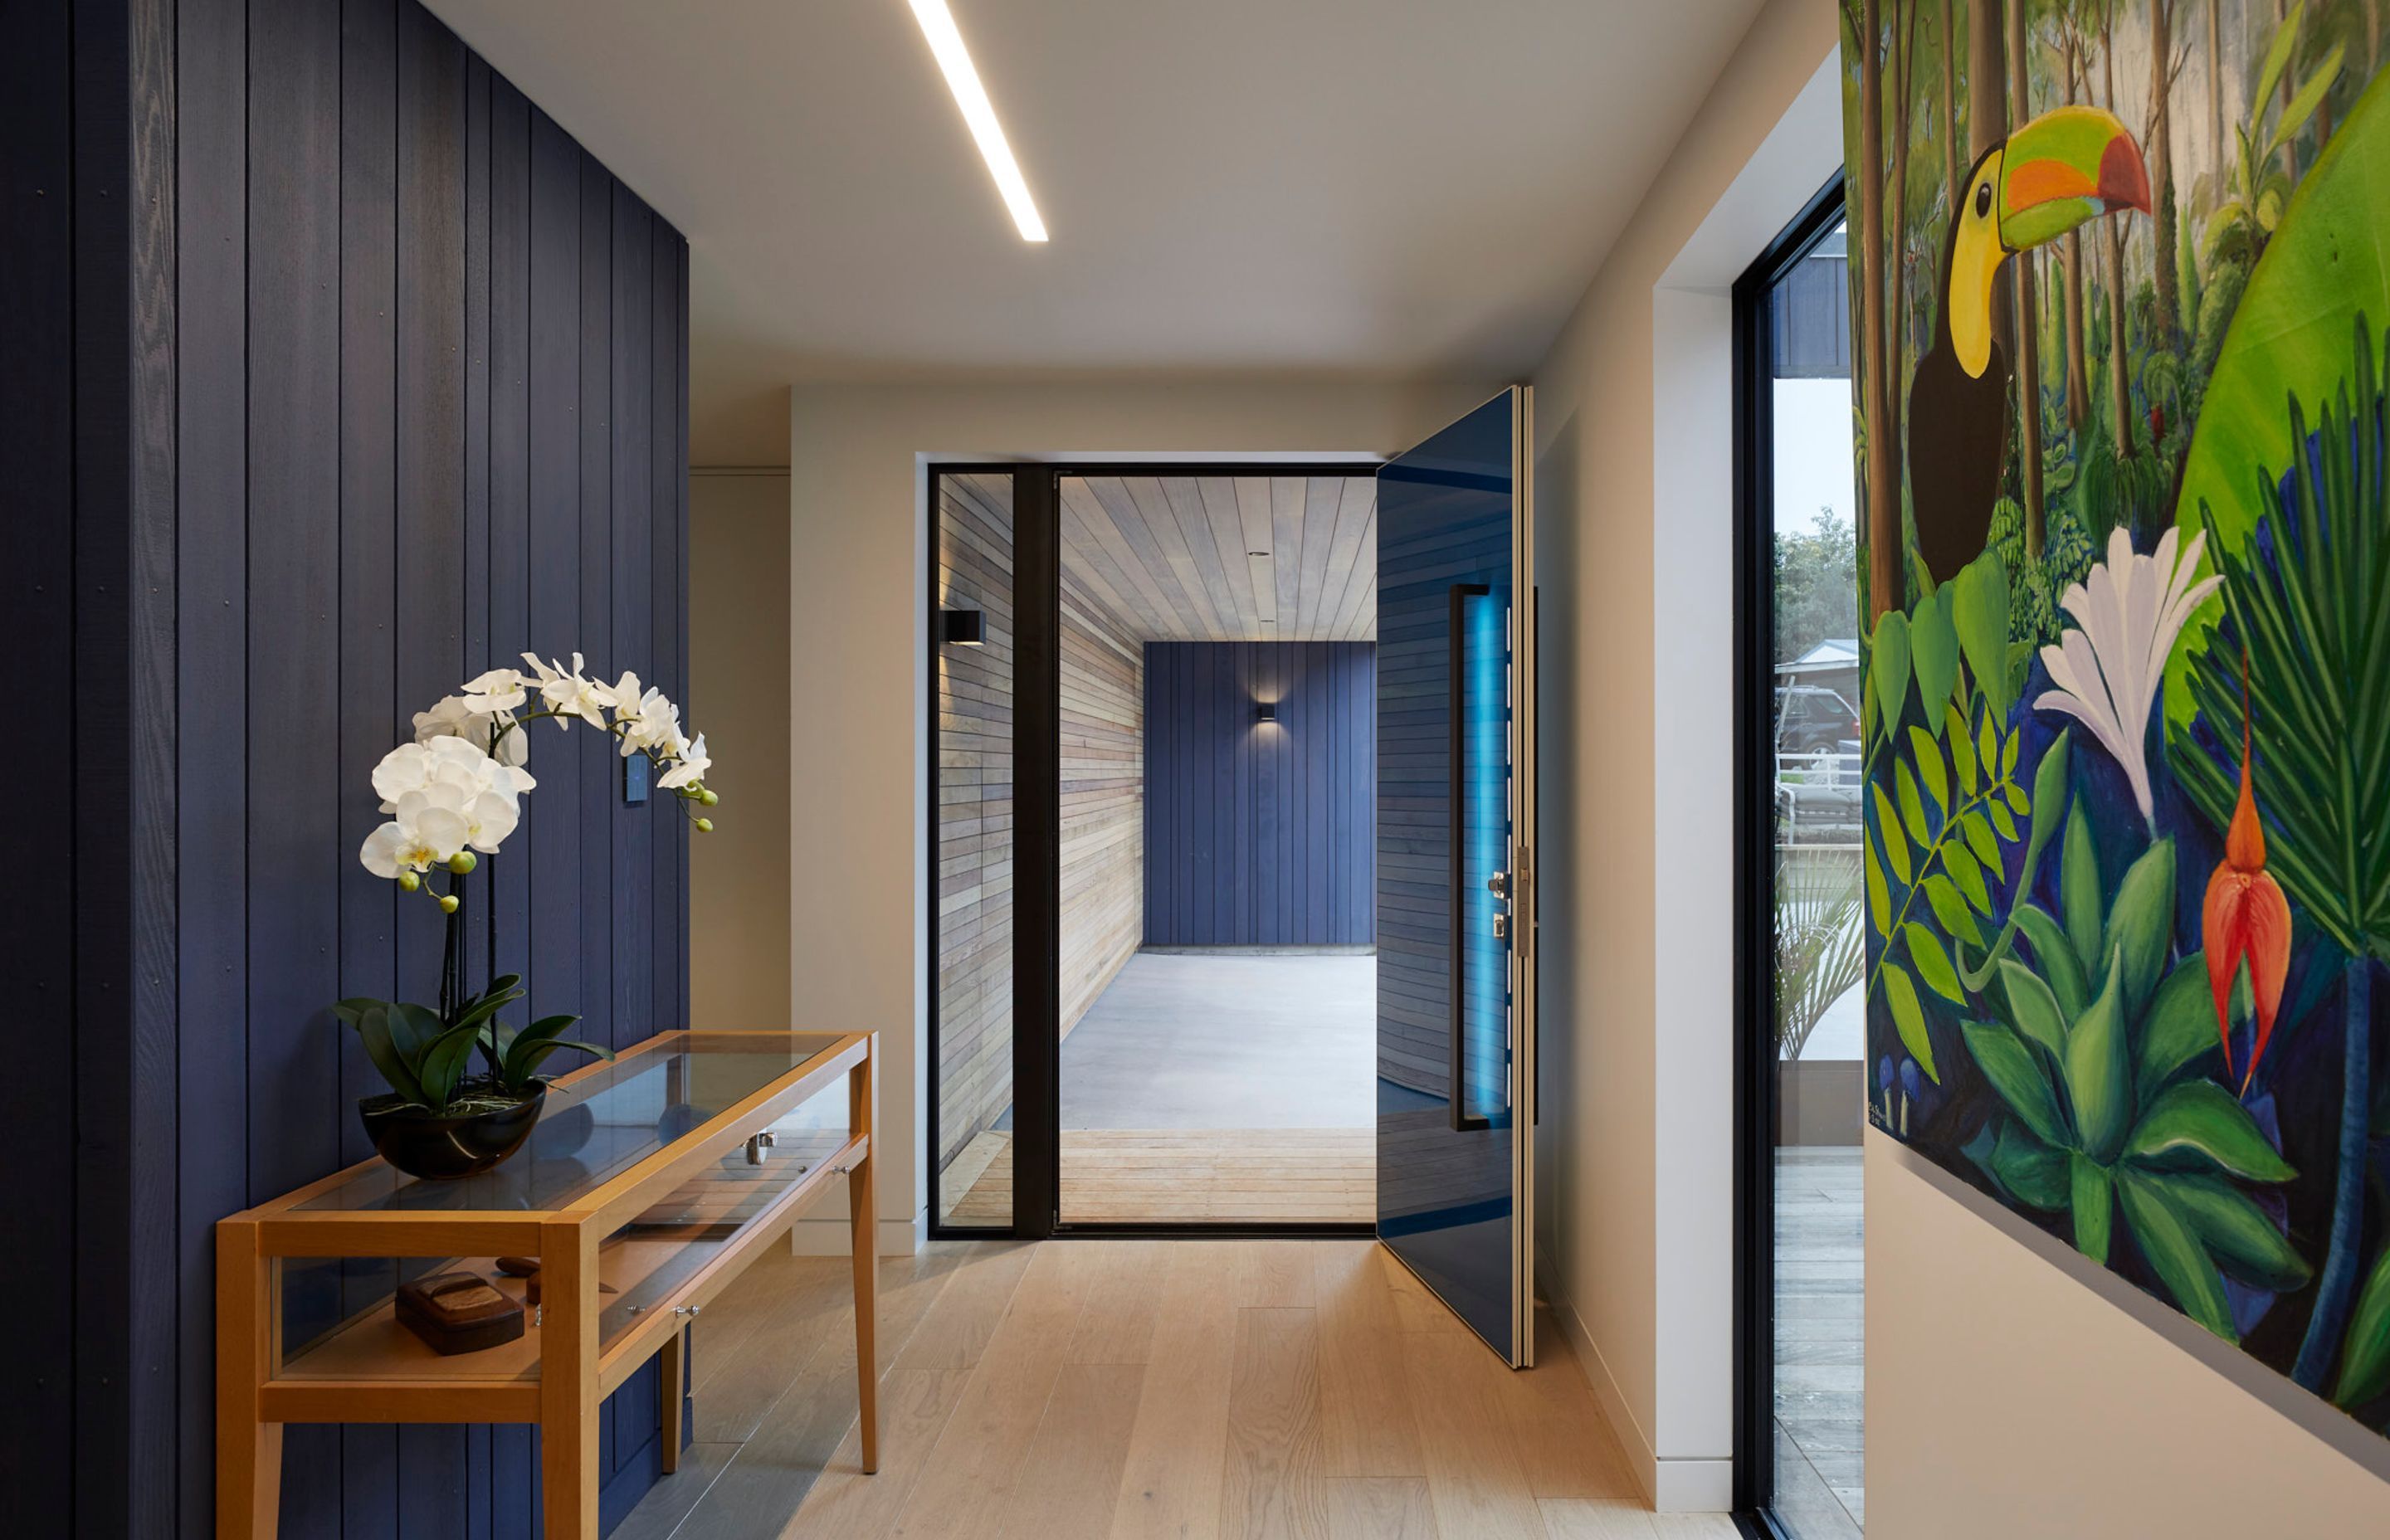 Interior designers (Steiner) specified feature wallpapers, radiators that appear more like artwork than heating units and solid oak flooring (Forte’ Flooring).  